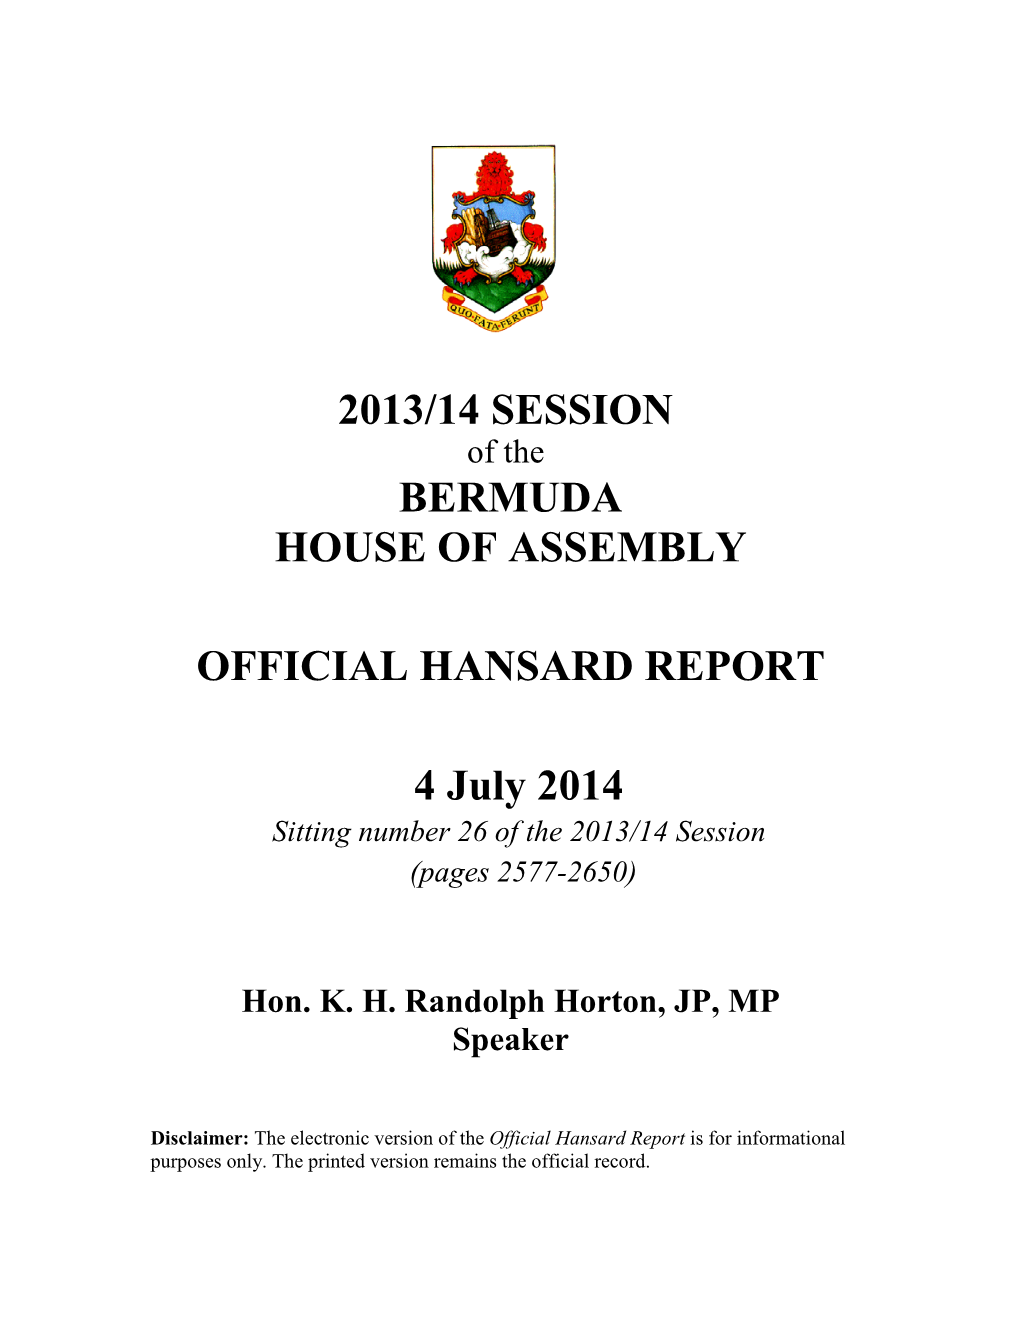 2013/14 Session Bermuda House of Assembly